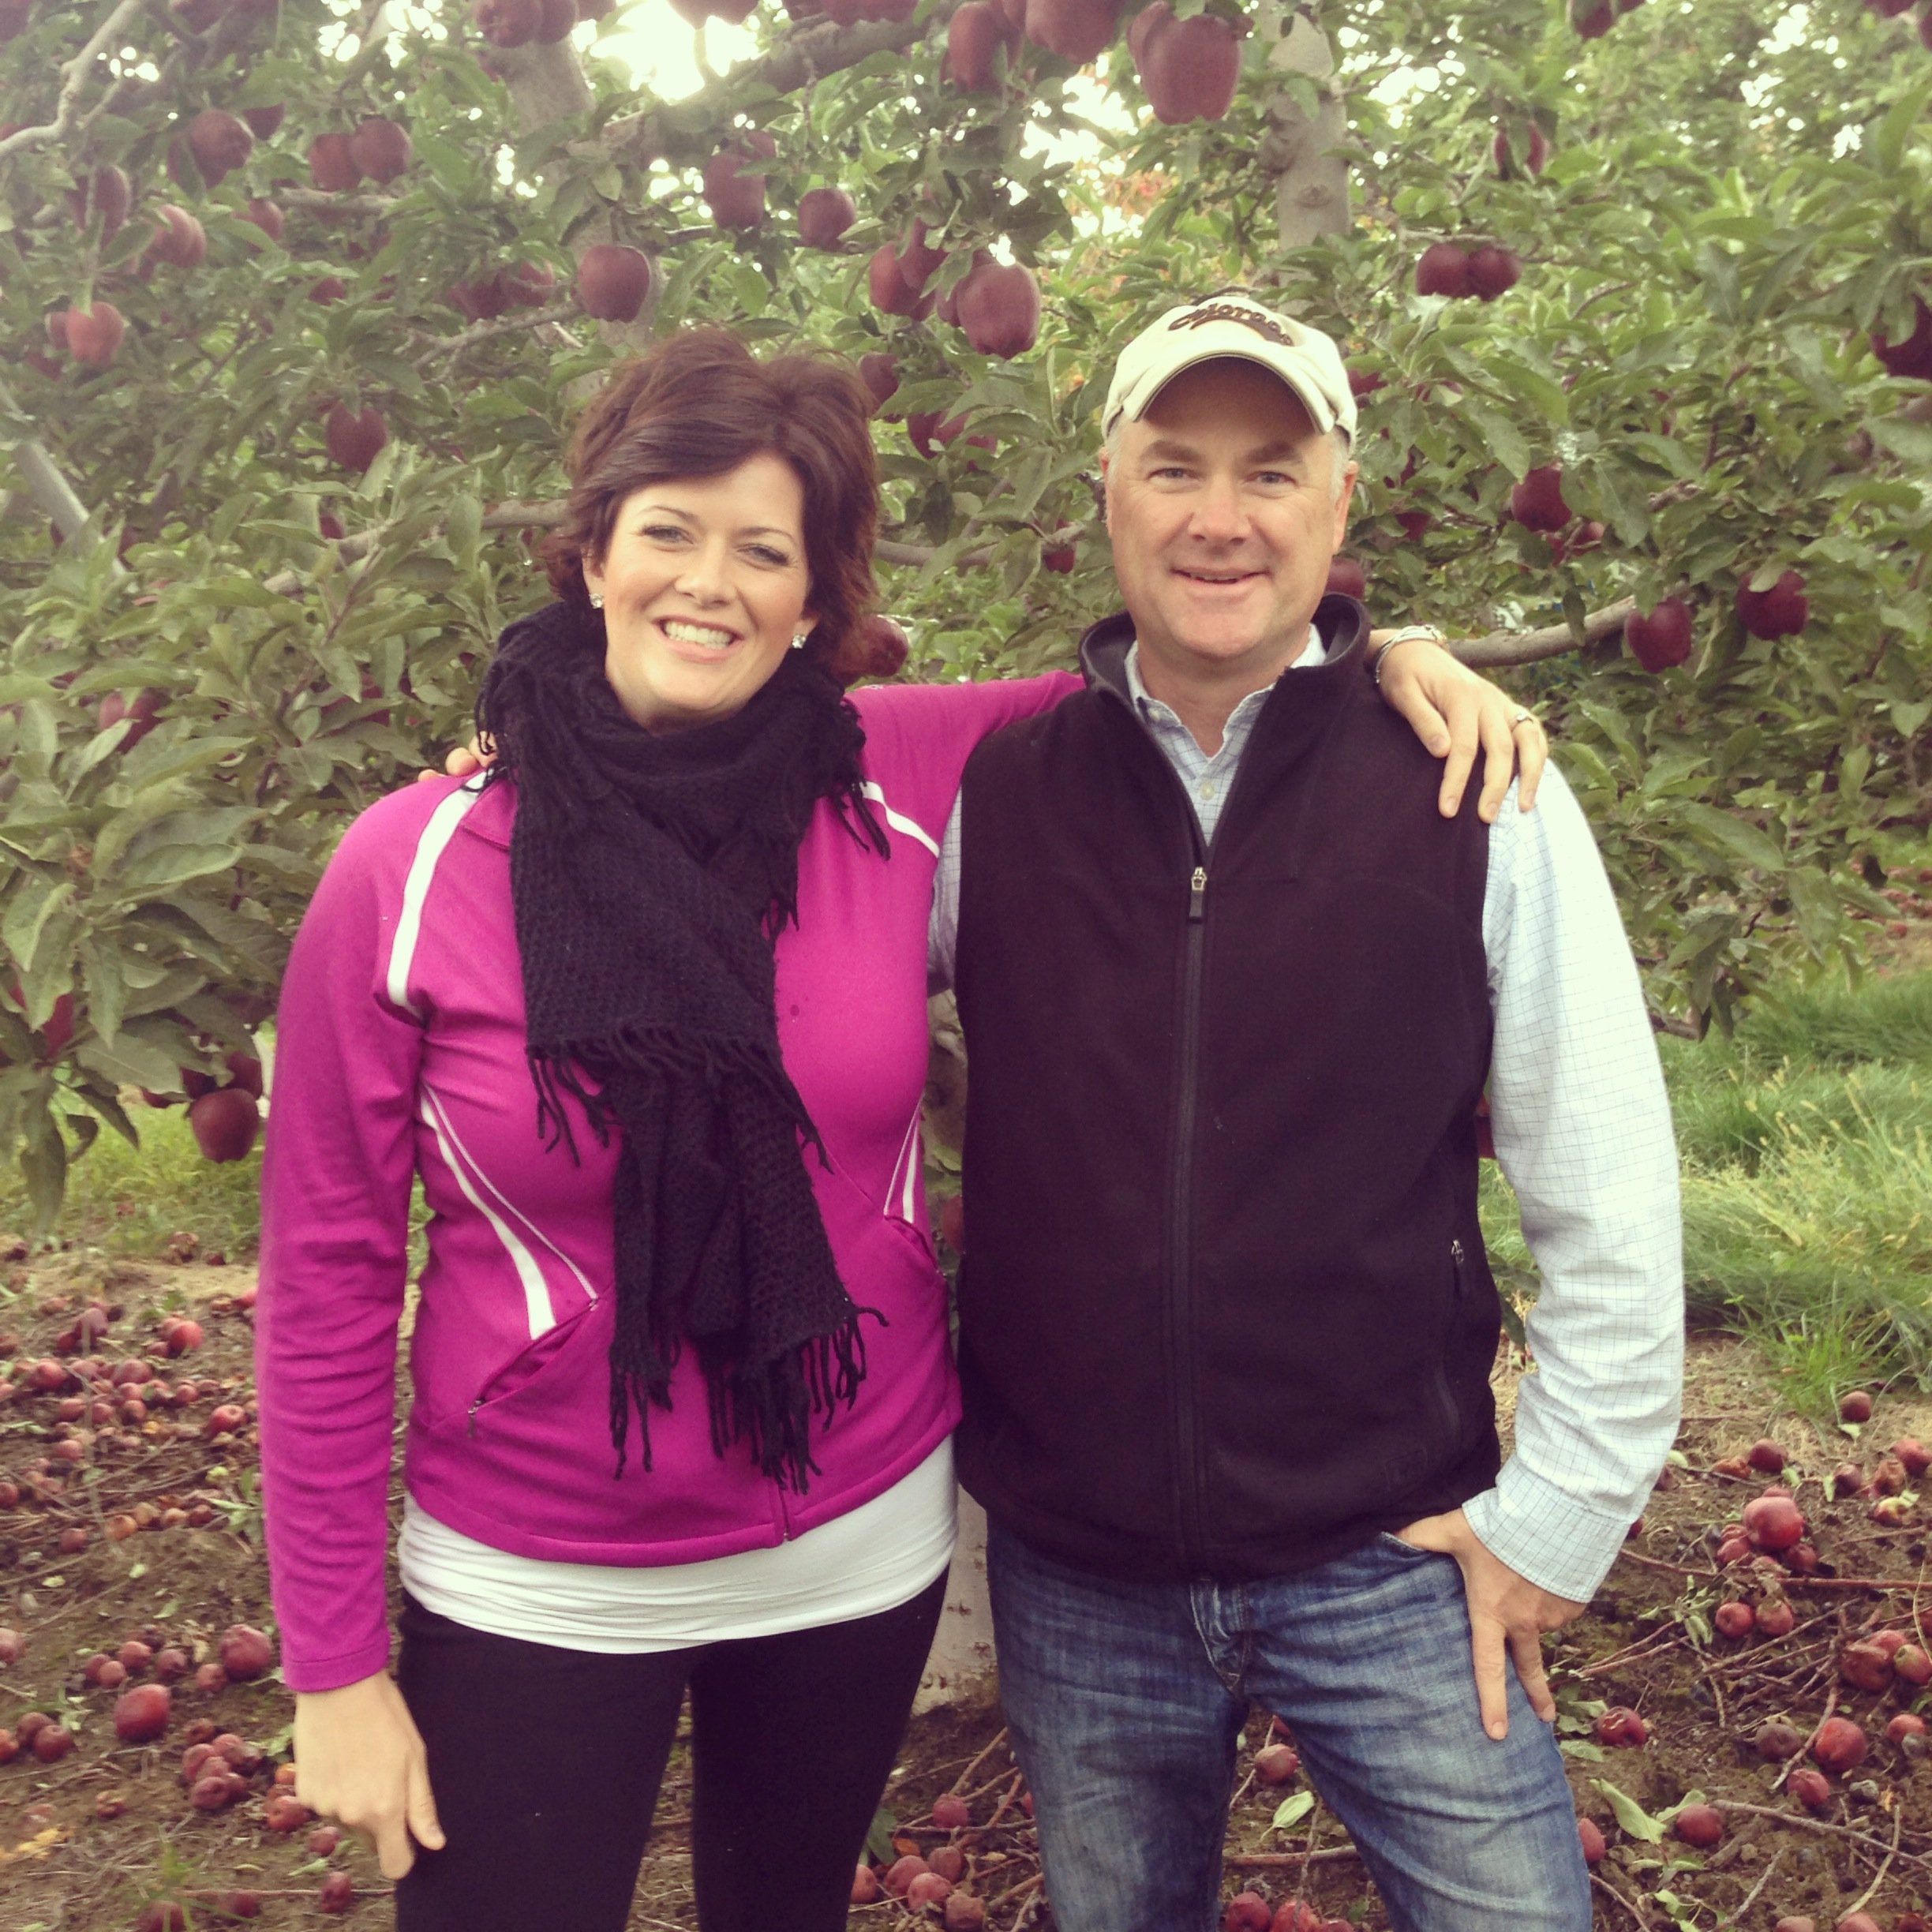 Peter is one of the growers & founding members/owners of Sage Fruit. He planted that tree behind us when he was 11 years old during his Spring Break! Over 90% of America's farms are family-owned & family-farmed. Sage Fruit is proud to be a family-farmed business. Next time you see a Sage Fruit apples represent culture - both from the State of Washington & the family traditions that are shared between the owners and their valued team.